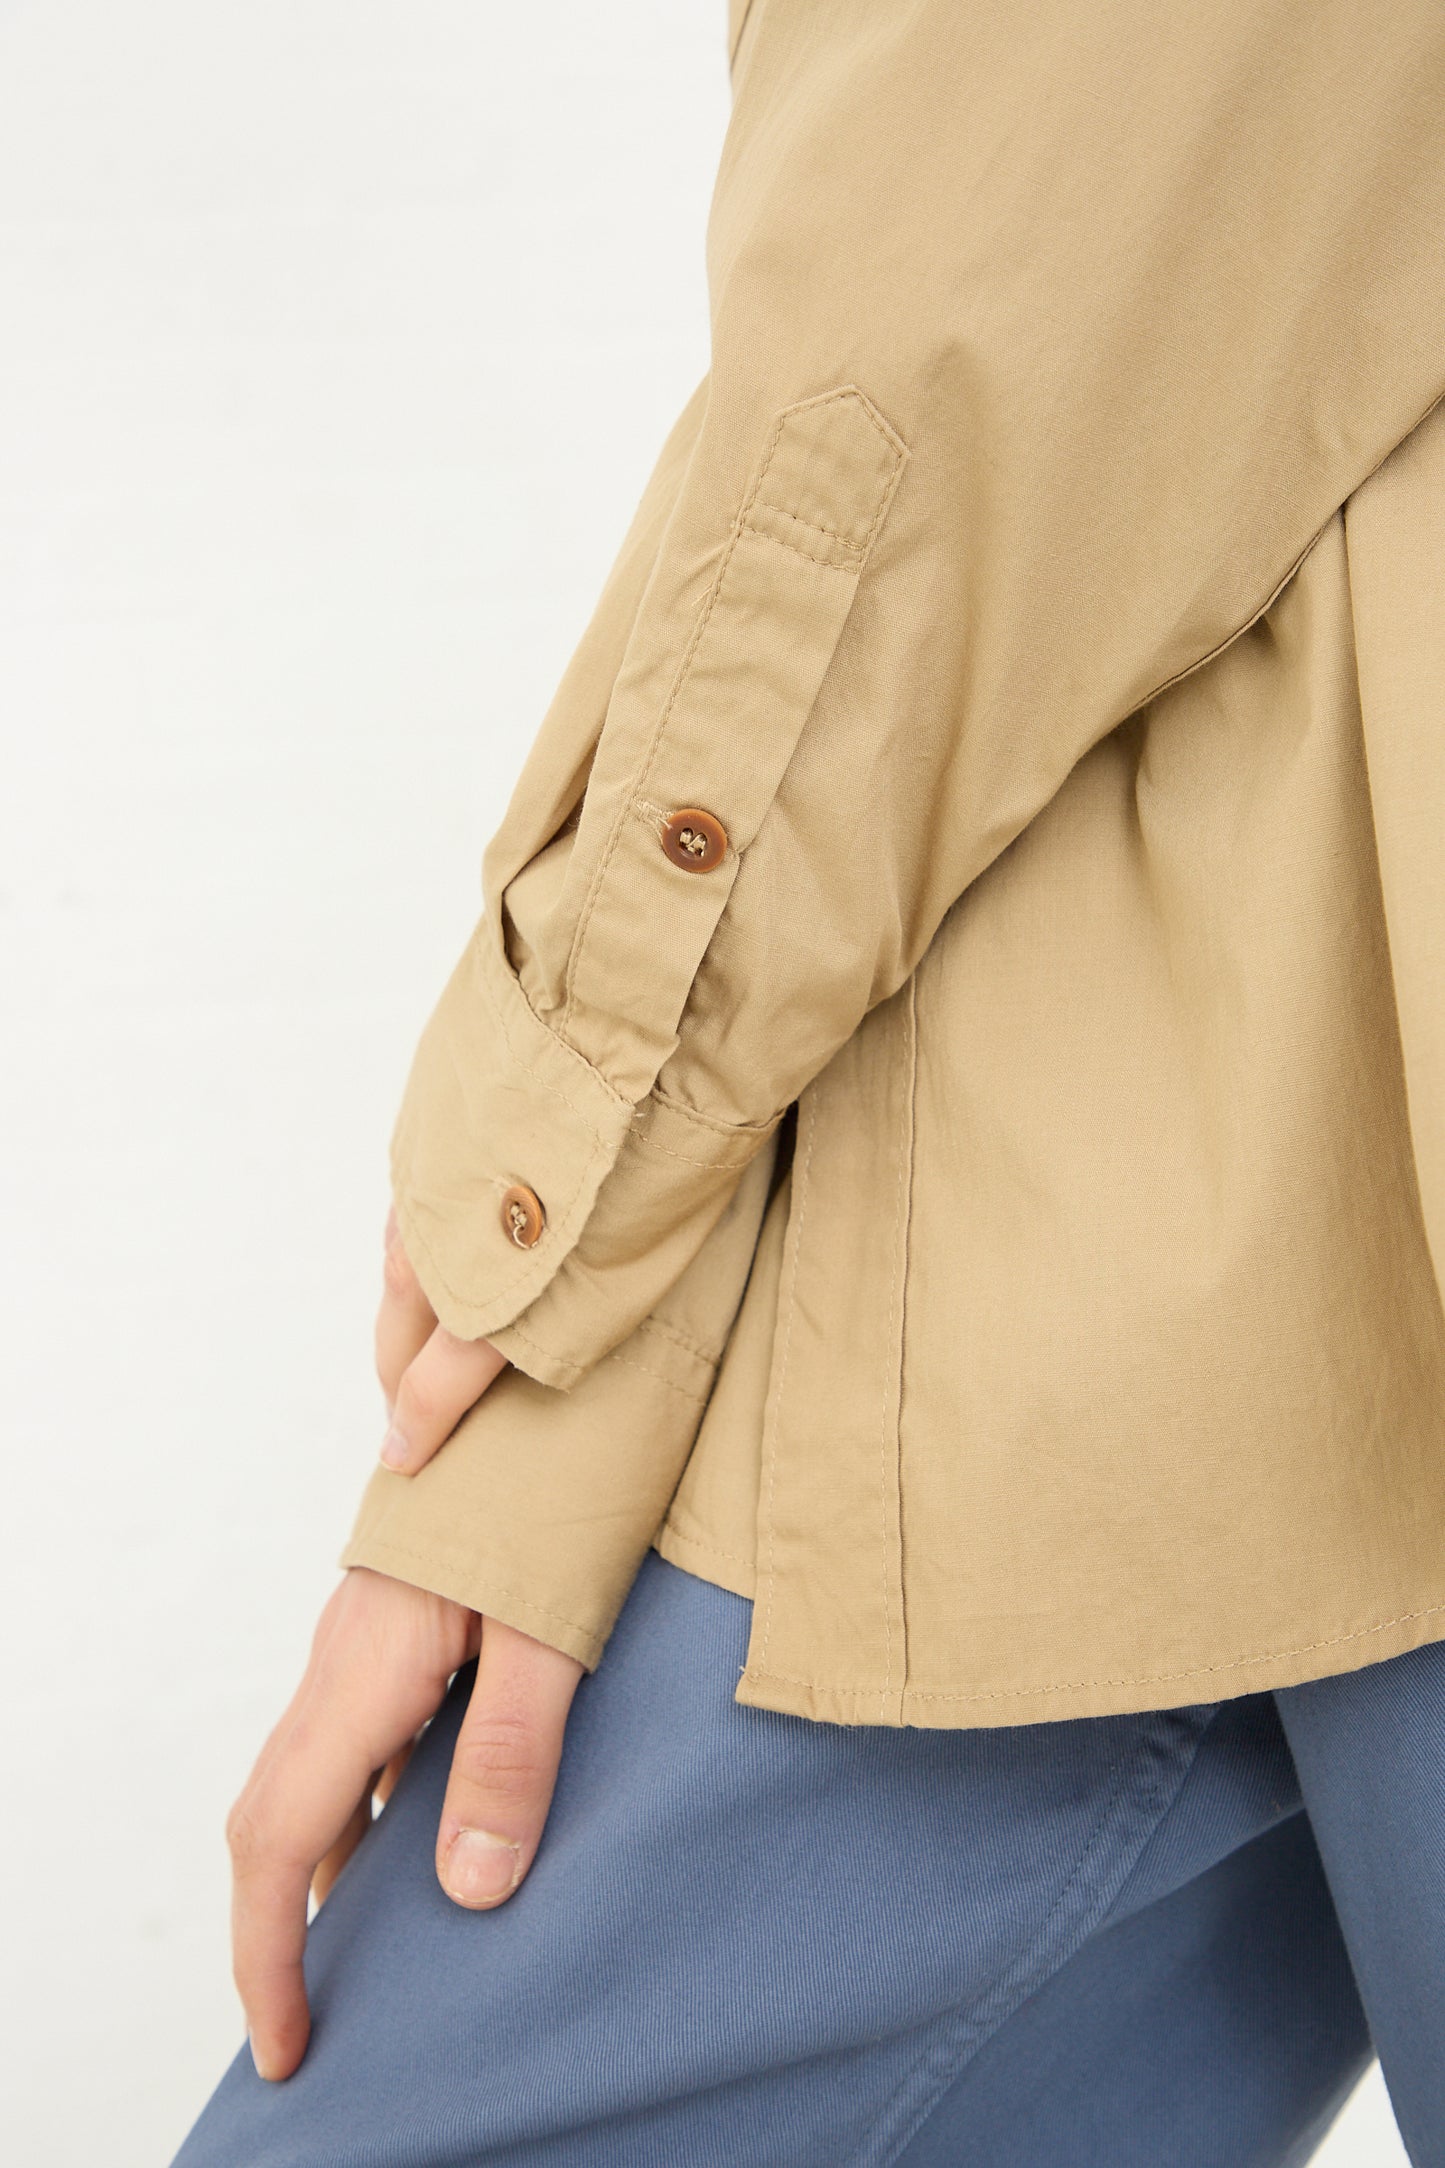 Close-up of a person wearing an As Ever 101 Shirt in 40's Khaki vintage jacket with a buttoned cuff, standing with their hand on their hip, wearing blue trousers.